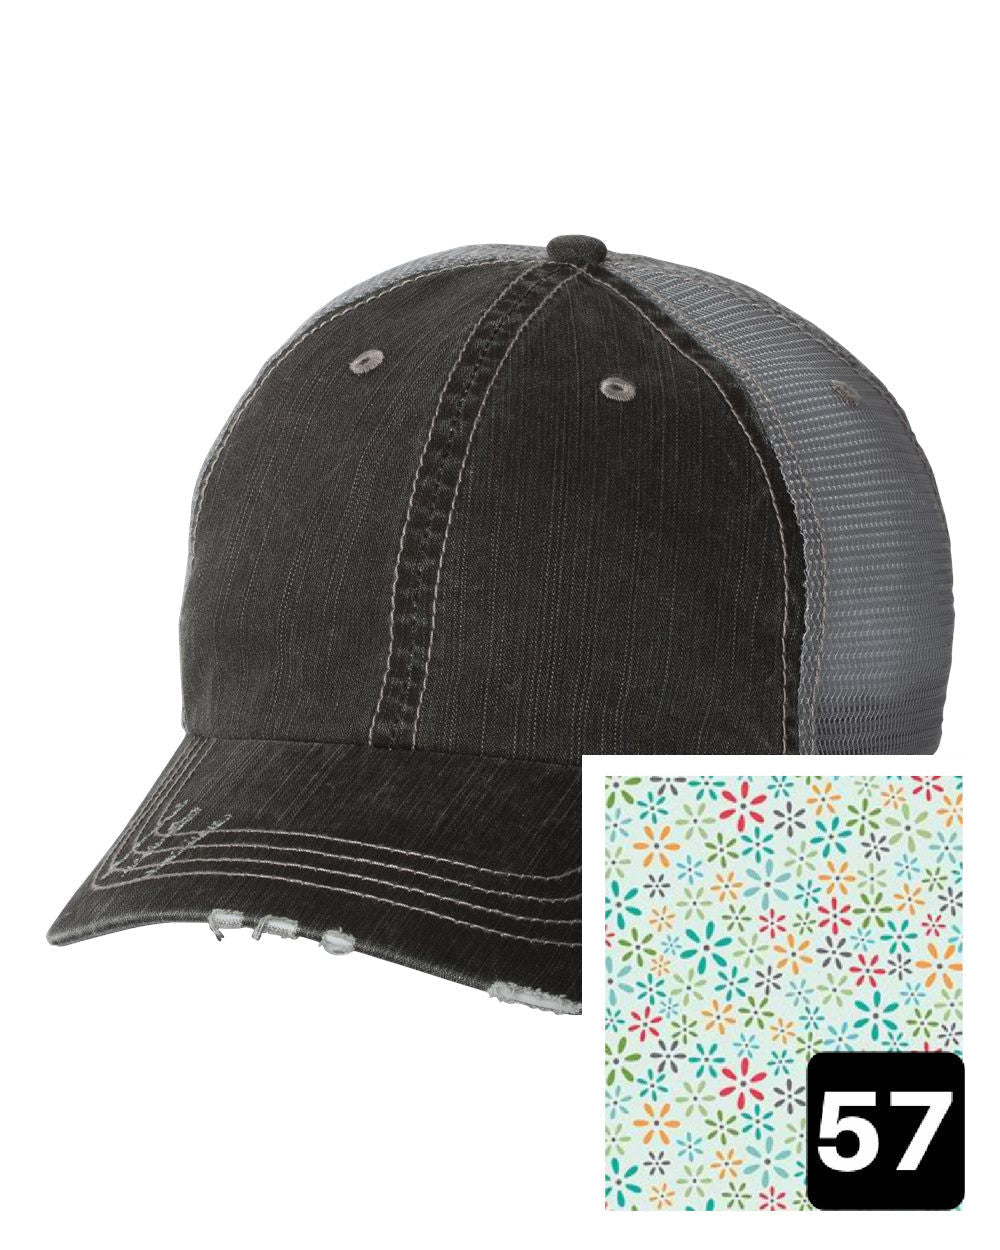 gray distressed trucker hat with white daisy on yellow fabric state of Colorado